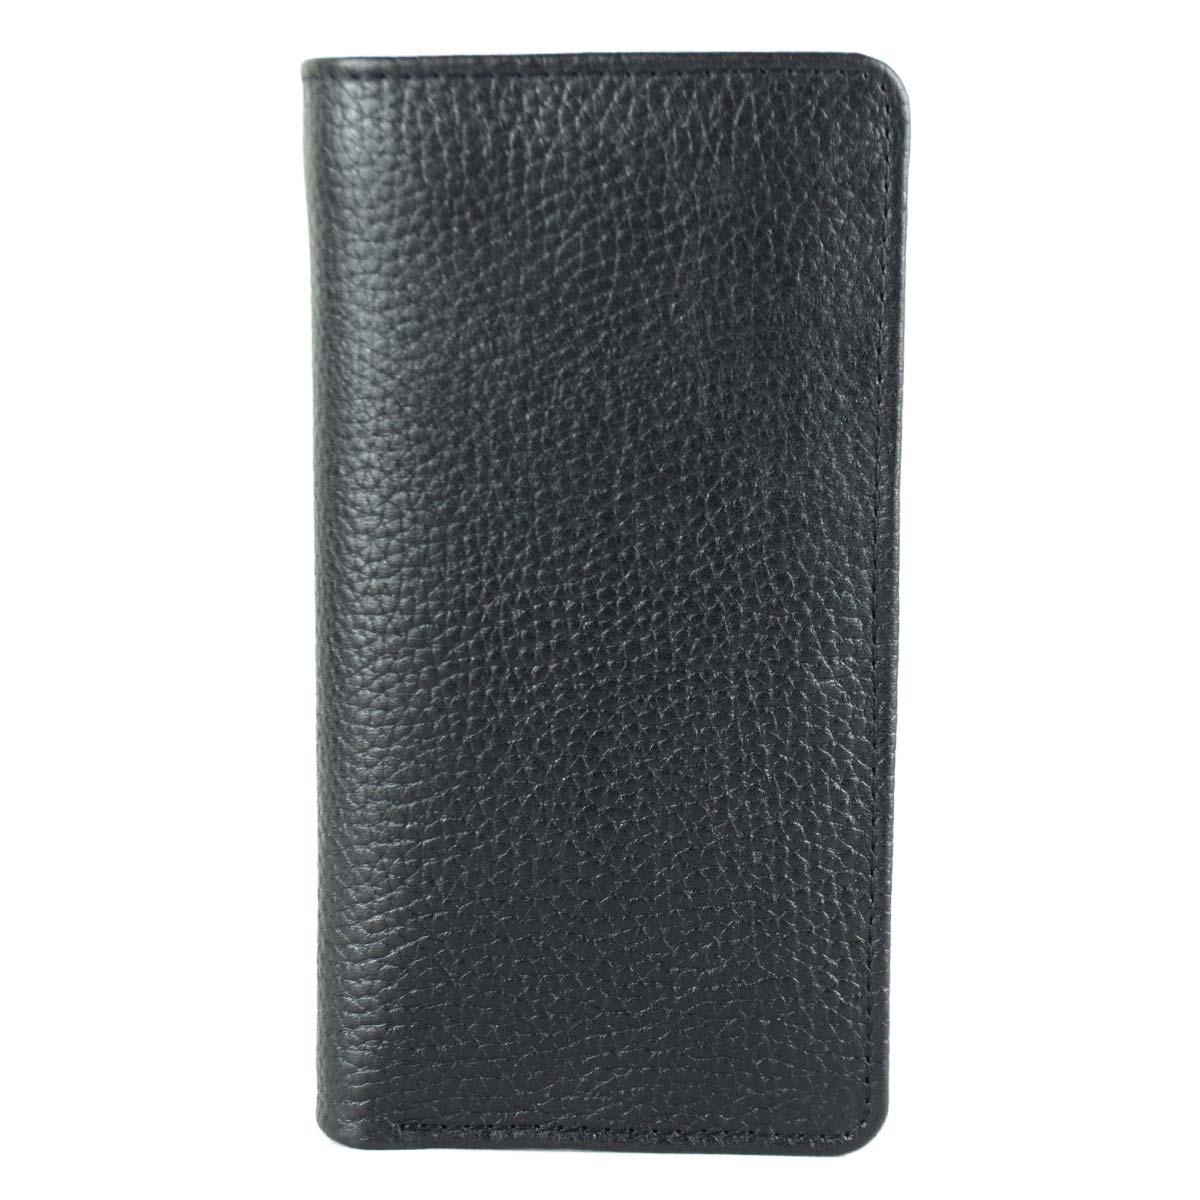 BLACK LONG WALLET WITH SEVERAL POCKETS